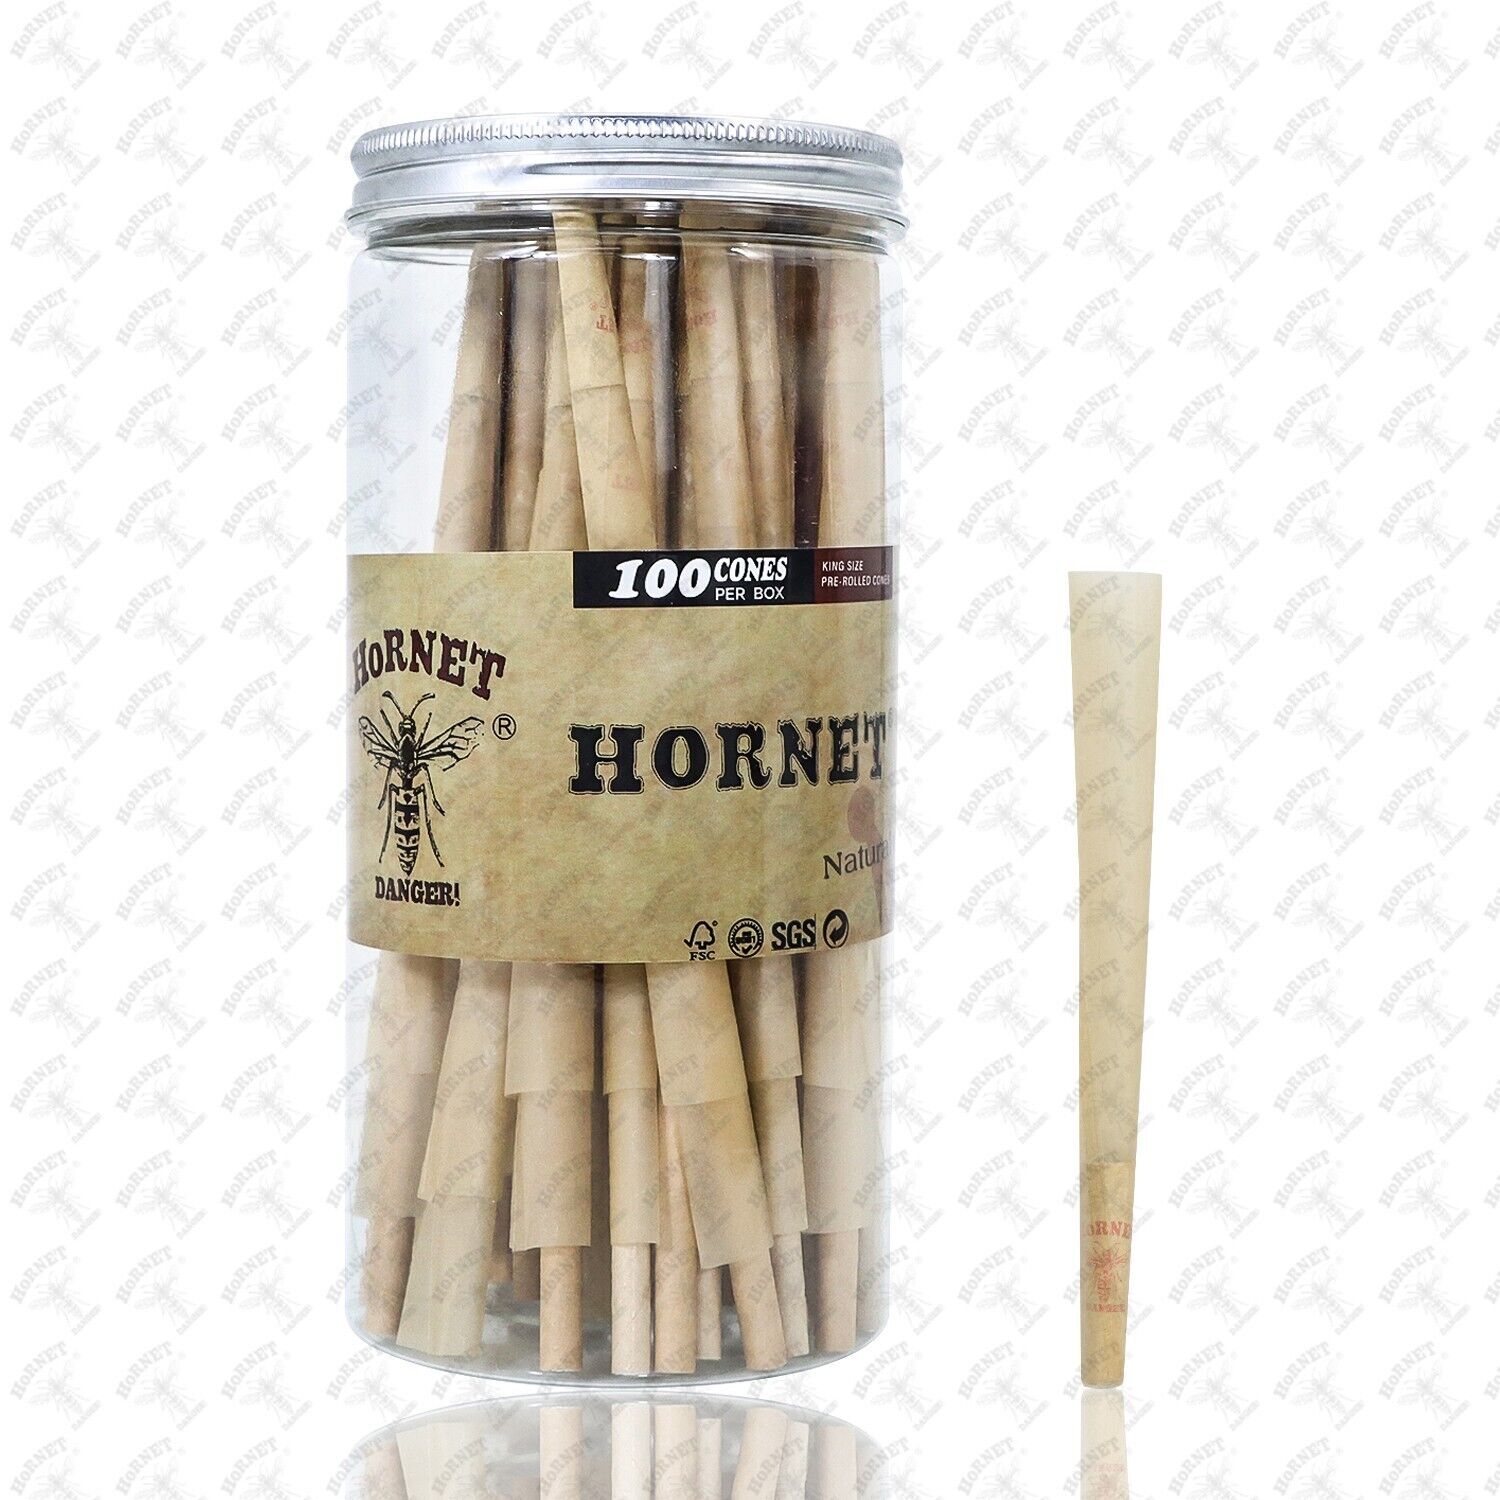 Authentic Hornet Cones Classic King Size 100- Pre Rolled Cones with Filter Tips